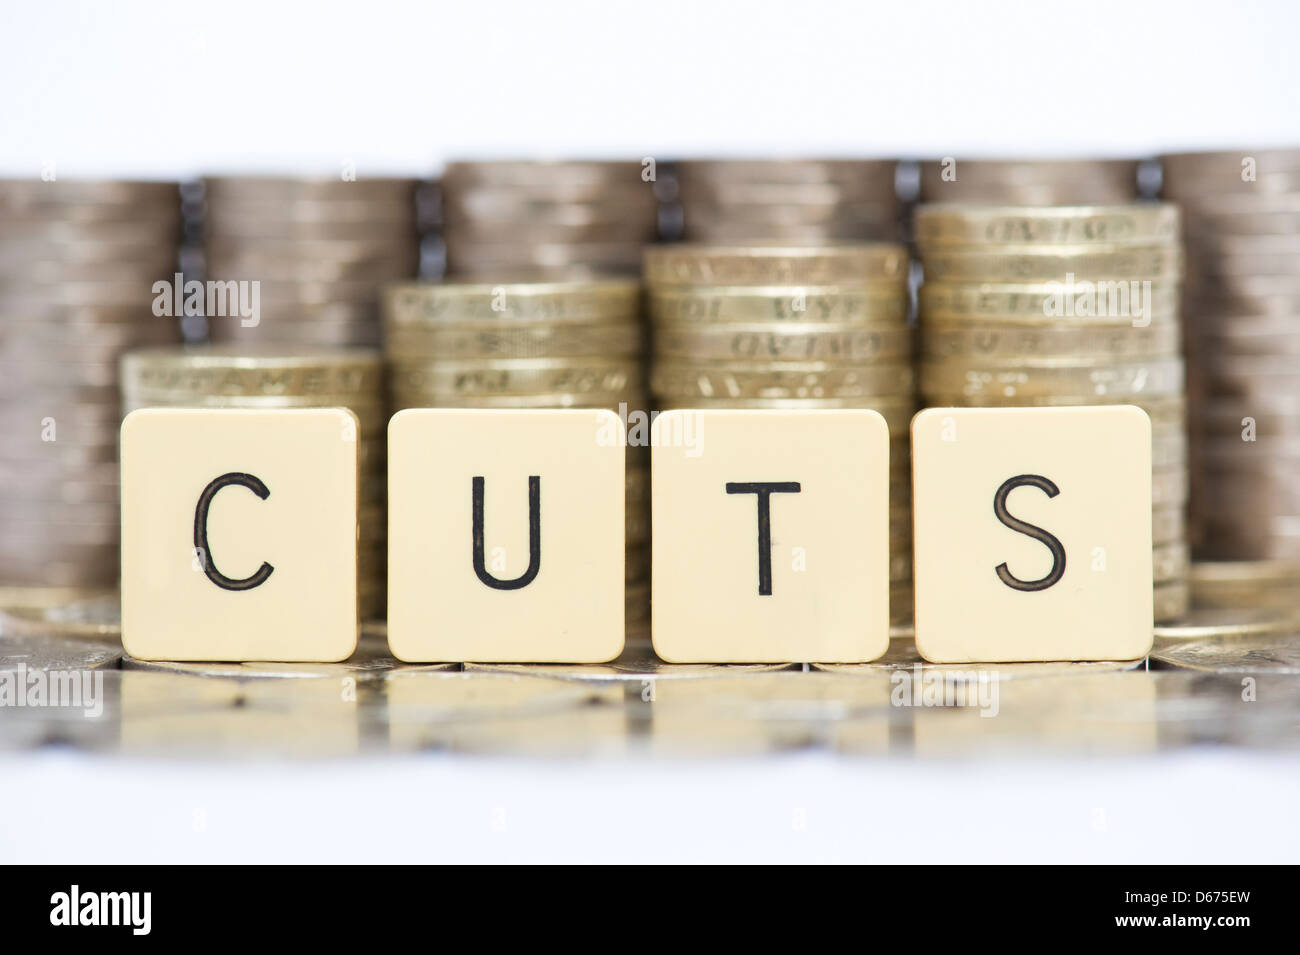 The word CUTS in front of stacks of English twenty pence and one pound coins Stock Photo